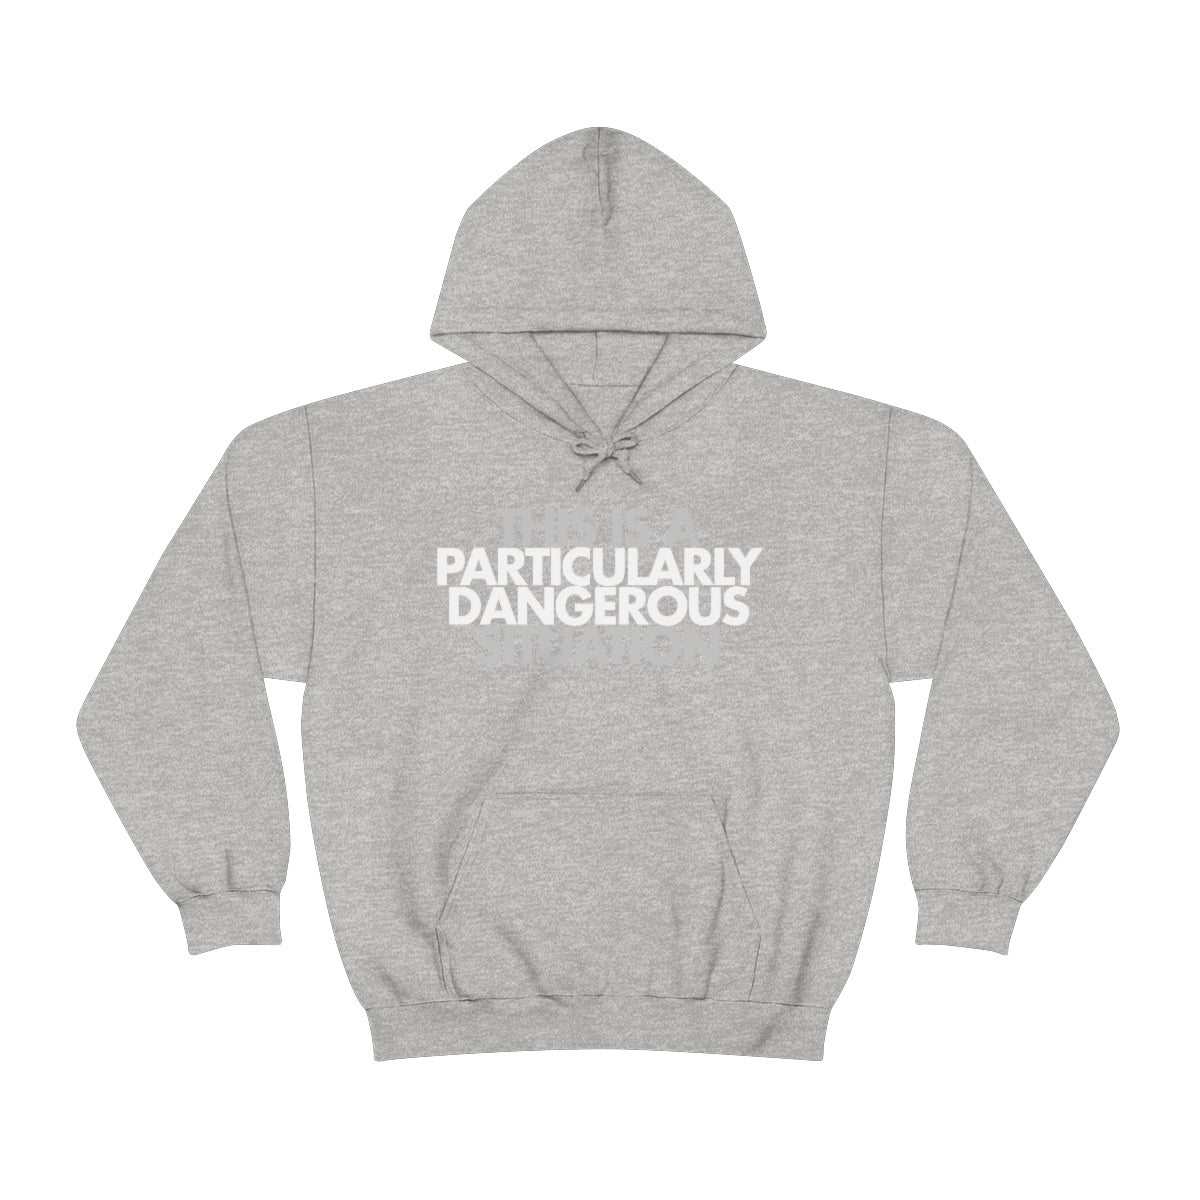 This is a PDS Hoodie 